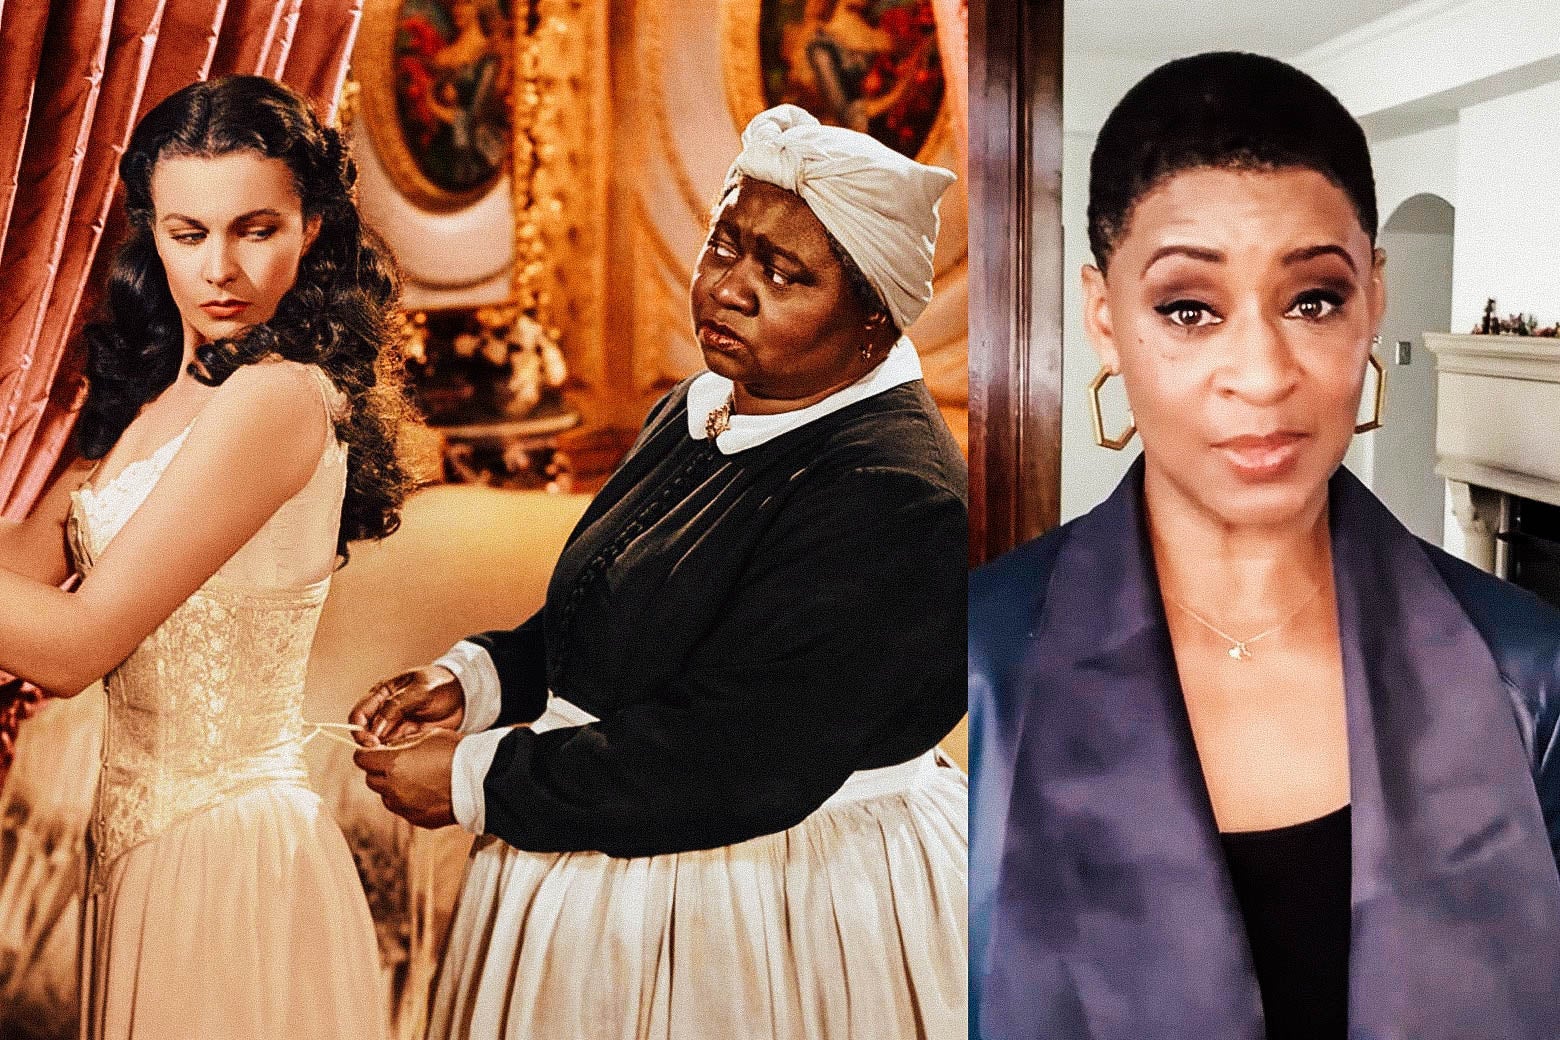 Side-by-side stills of Vivien Leigh and Hattie McDaniel in Gone With the Wind beside scholar Jacqueline Stewart introducing the film.